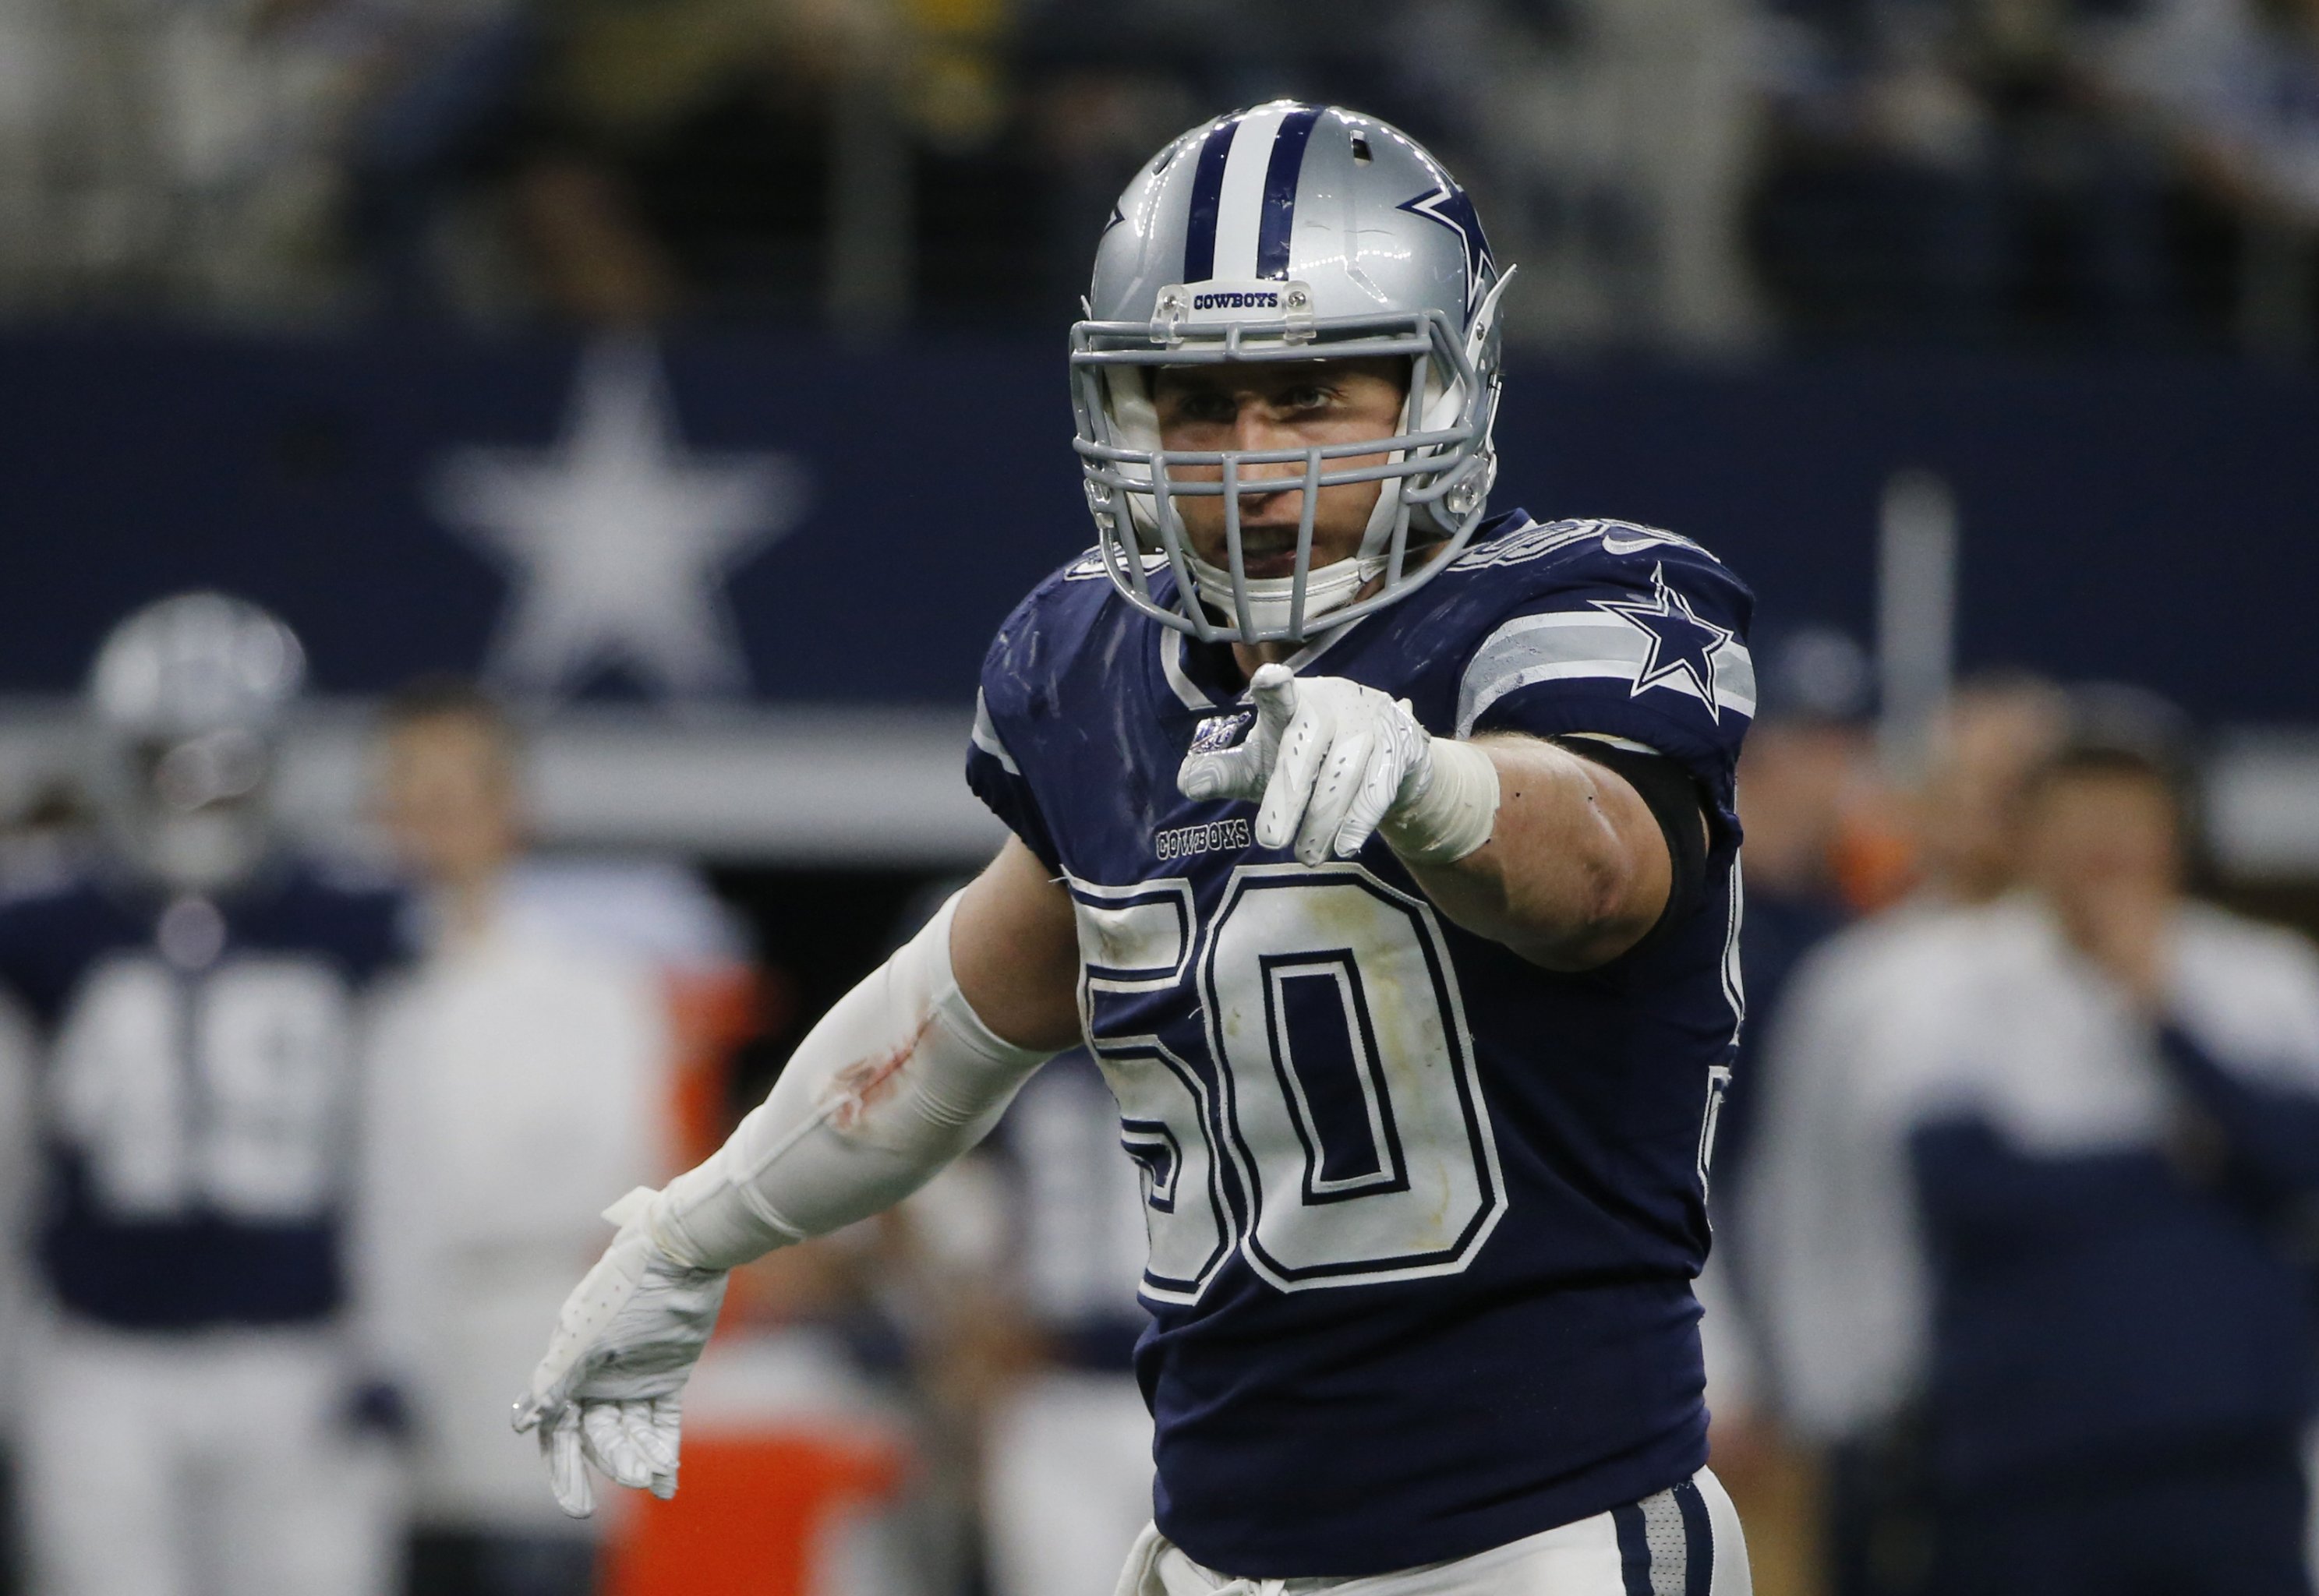 Cowboys linebacker Sean Lee retires after 11 mostly injury plagued